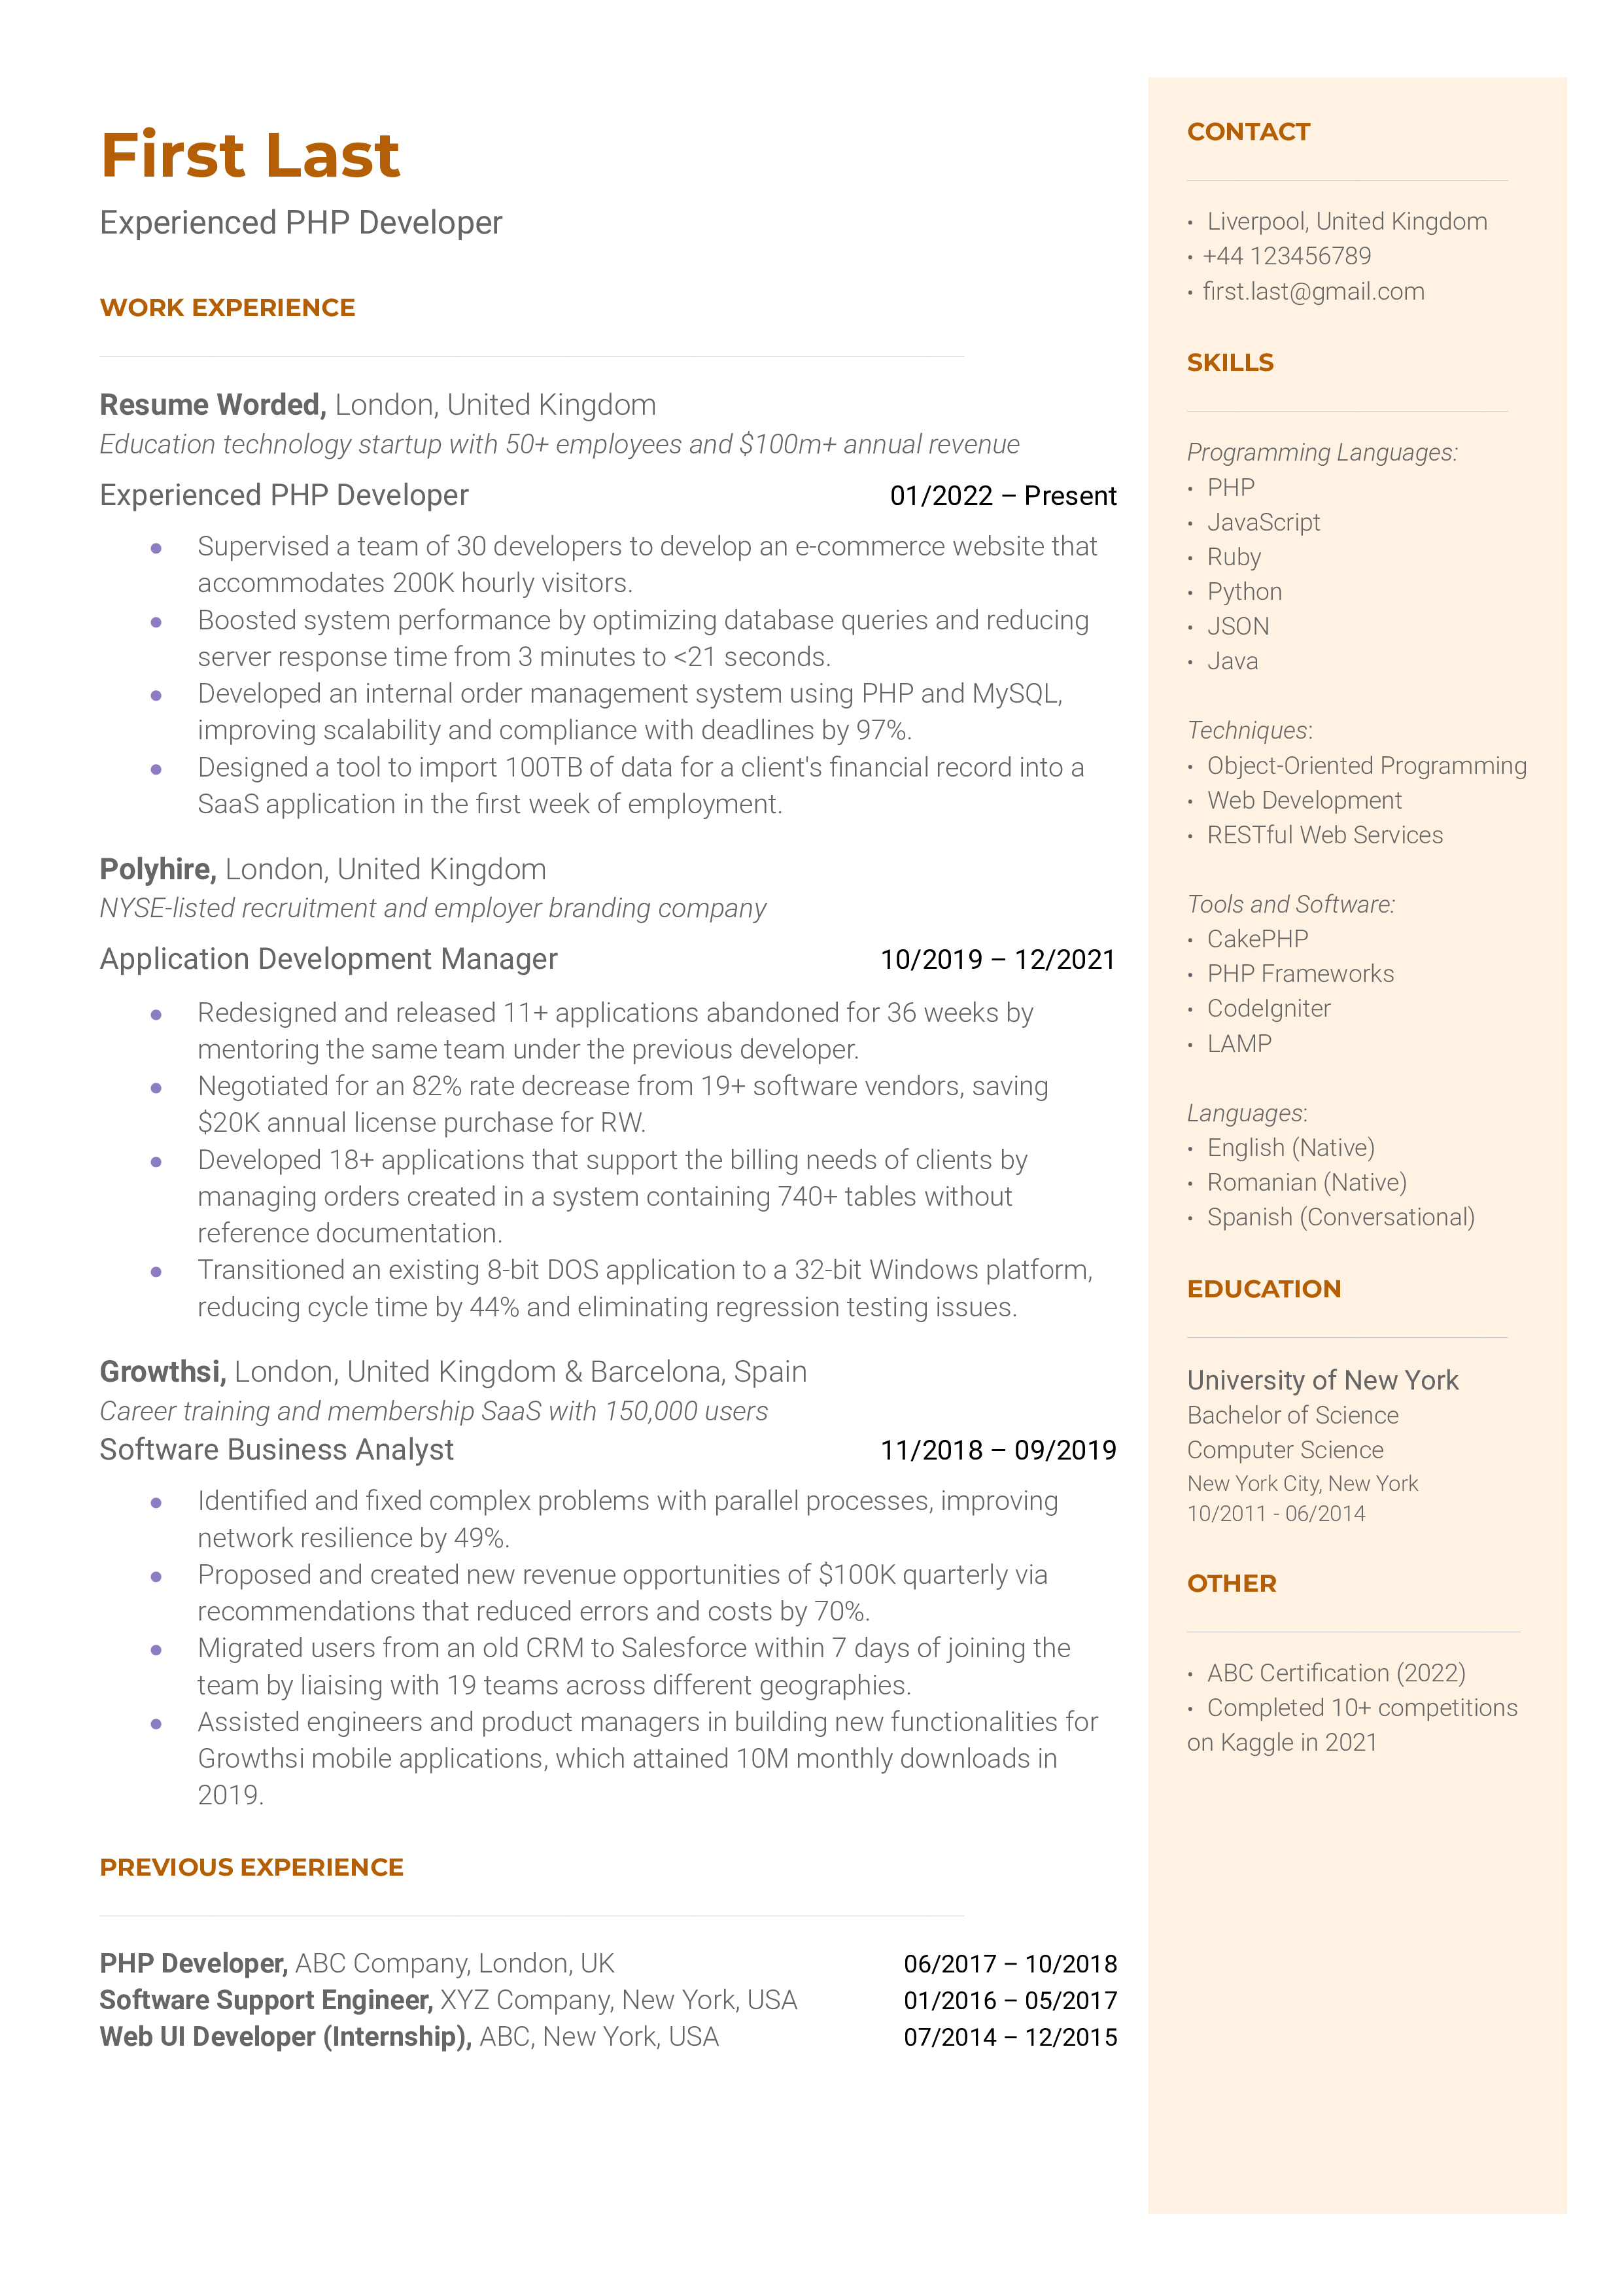 A experienced PHP developer resume template that prioritizes relevant work experience.